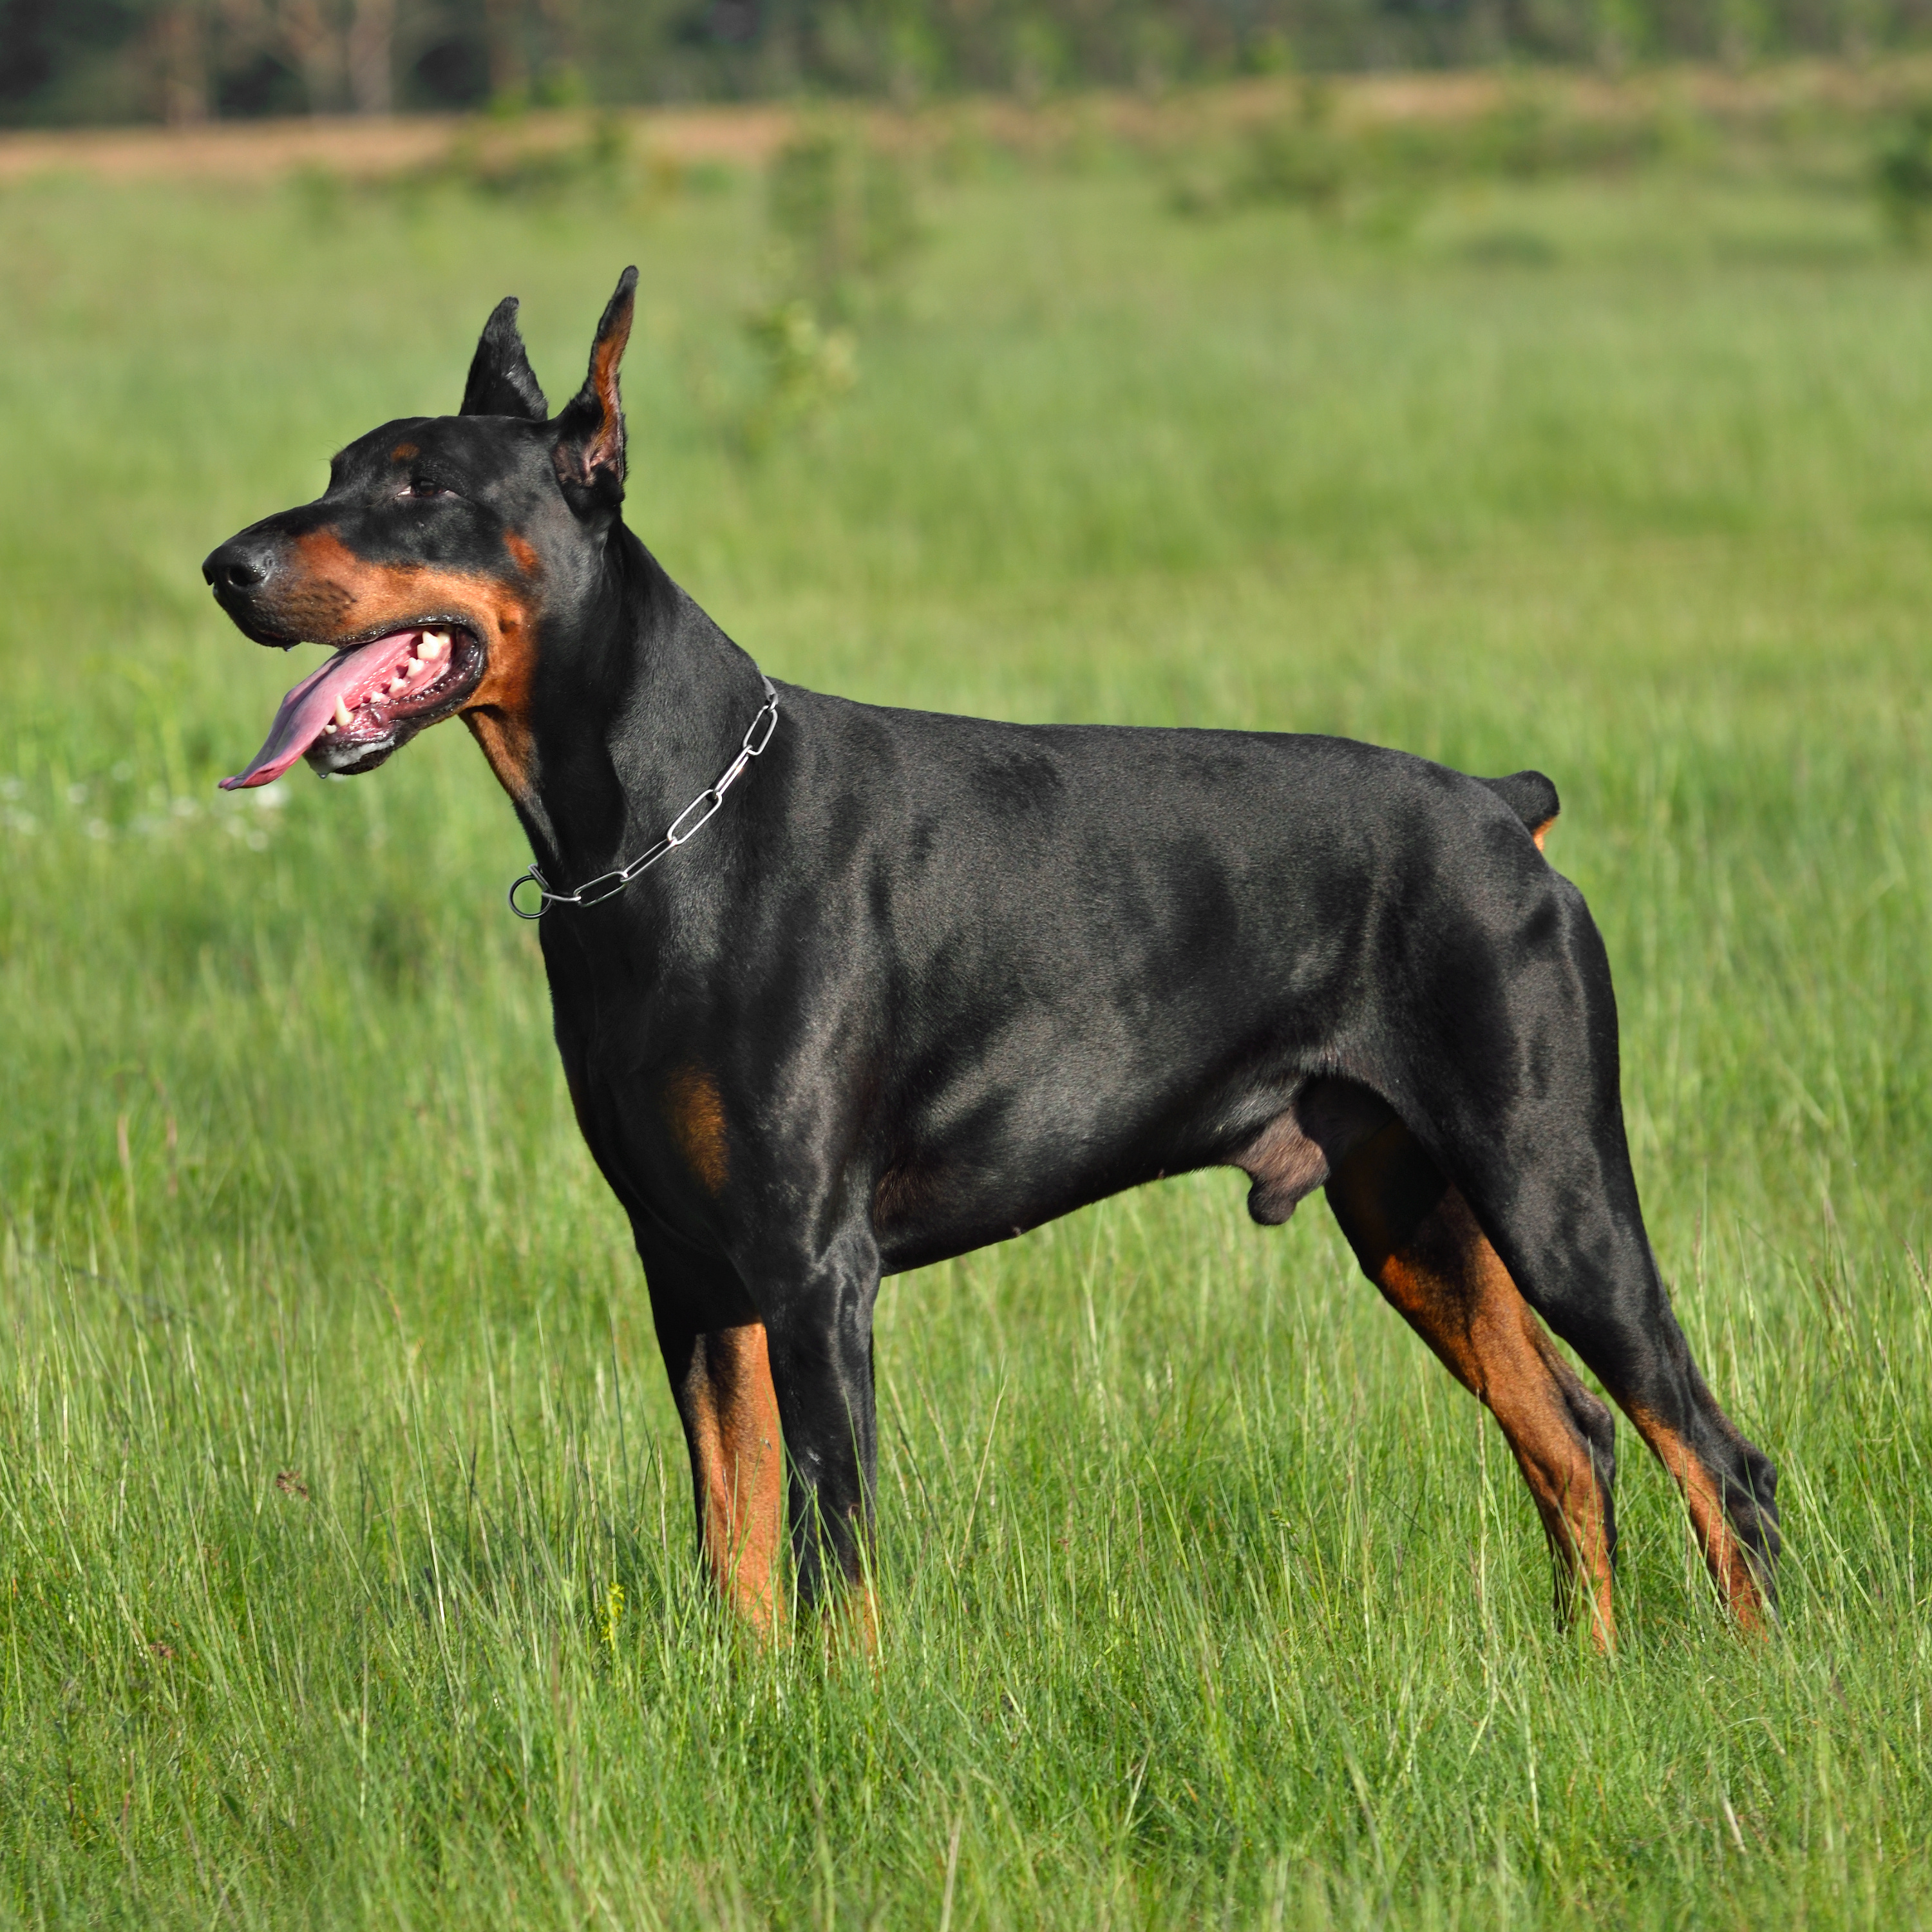 Dog Training Elite has expert Doberman training in Worcester, MA
																															 that are experienced in a variety of positive training methods for Dobermans.